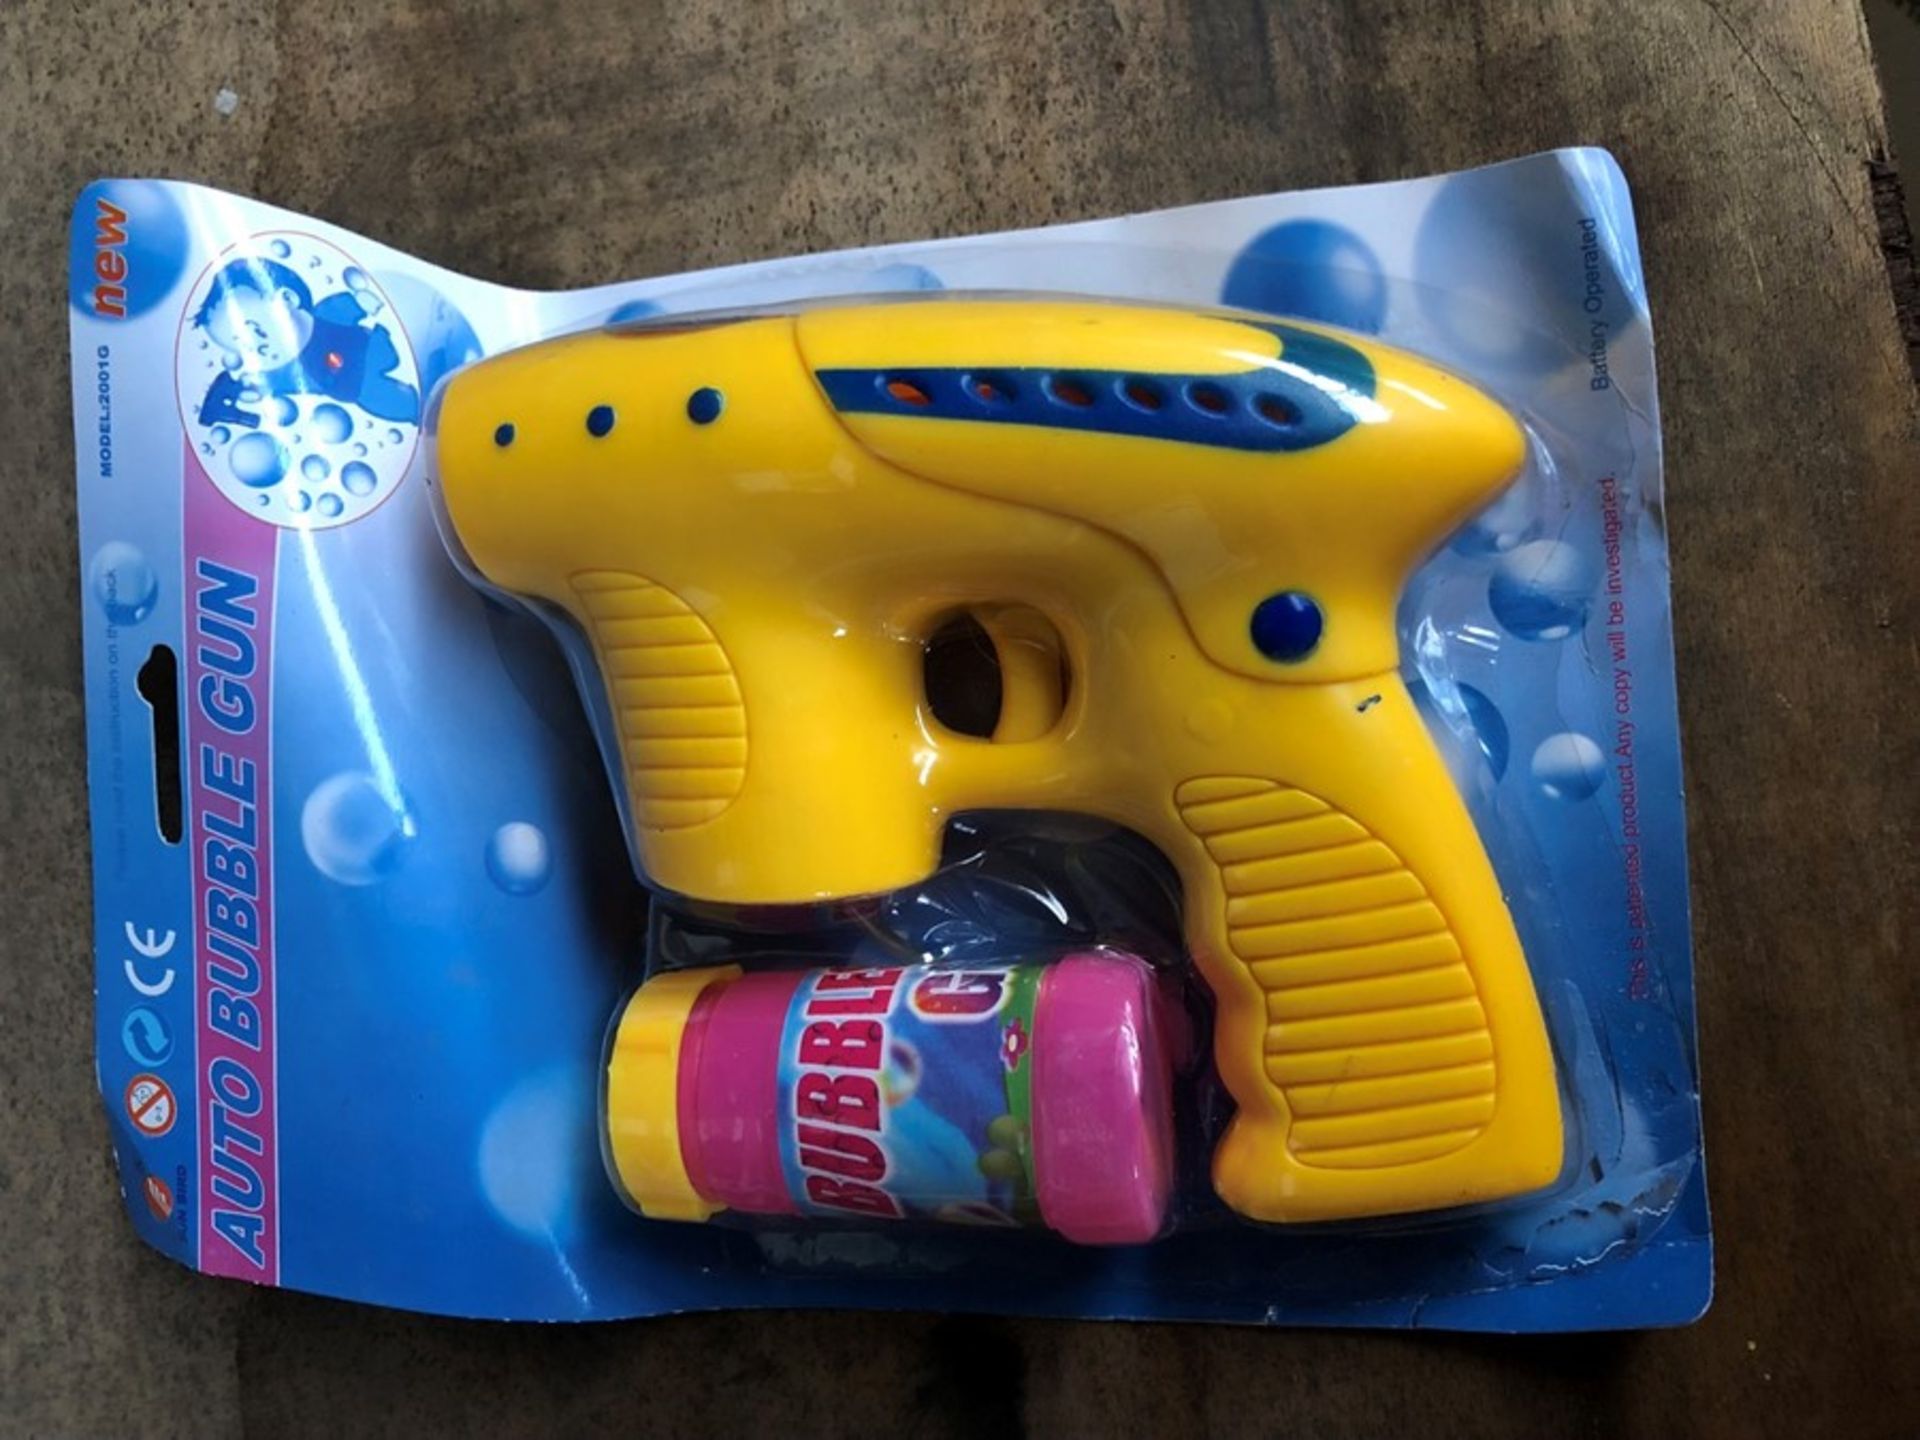 2 / BRAND NEW SEALED AUTO BUBBLE GUN (VIEWING HIGH